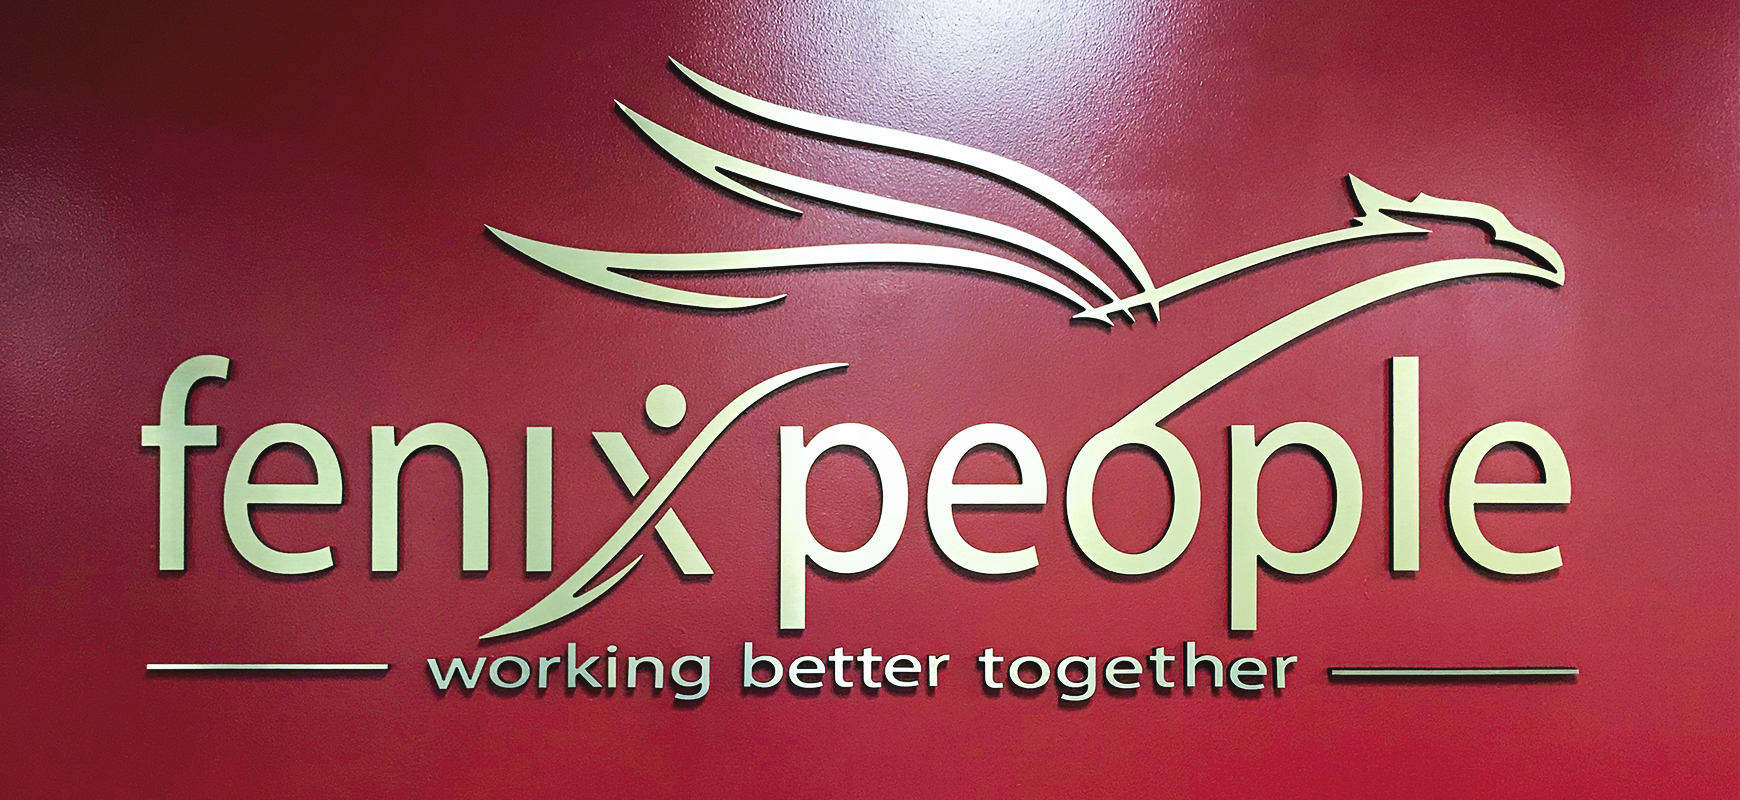 Fenix People foam core logo sign and letters made of ultra board for interior branding